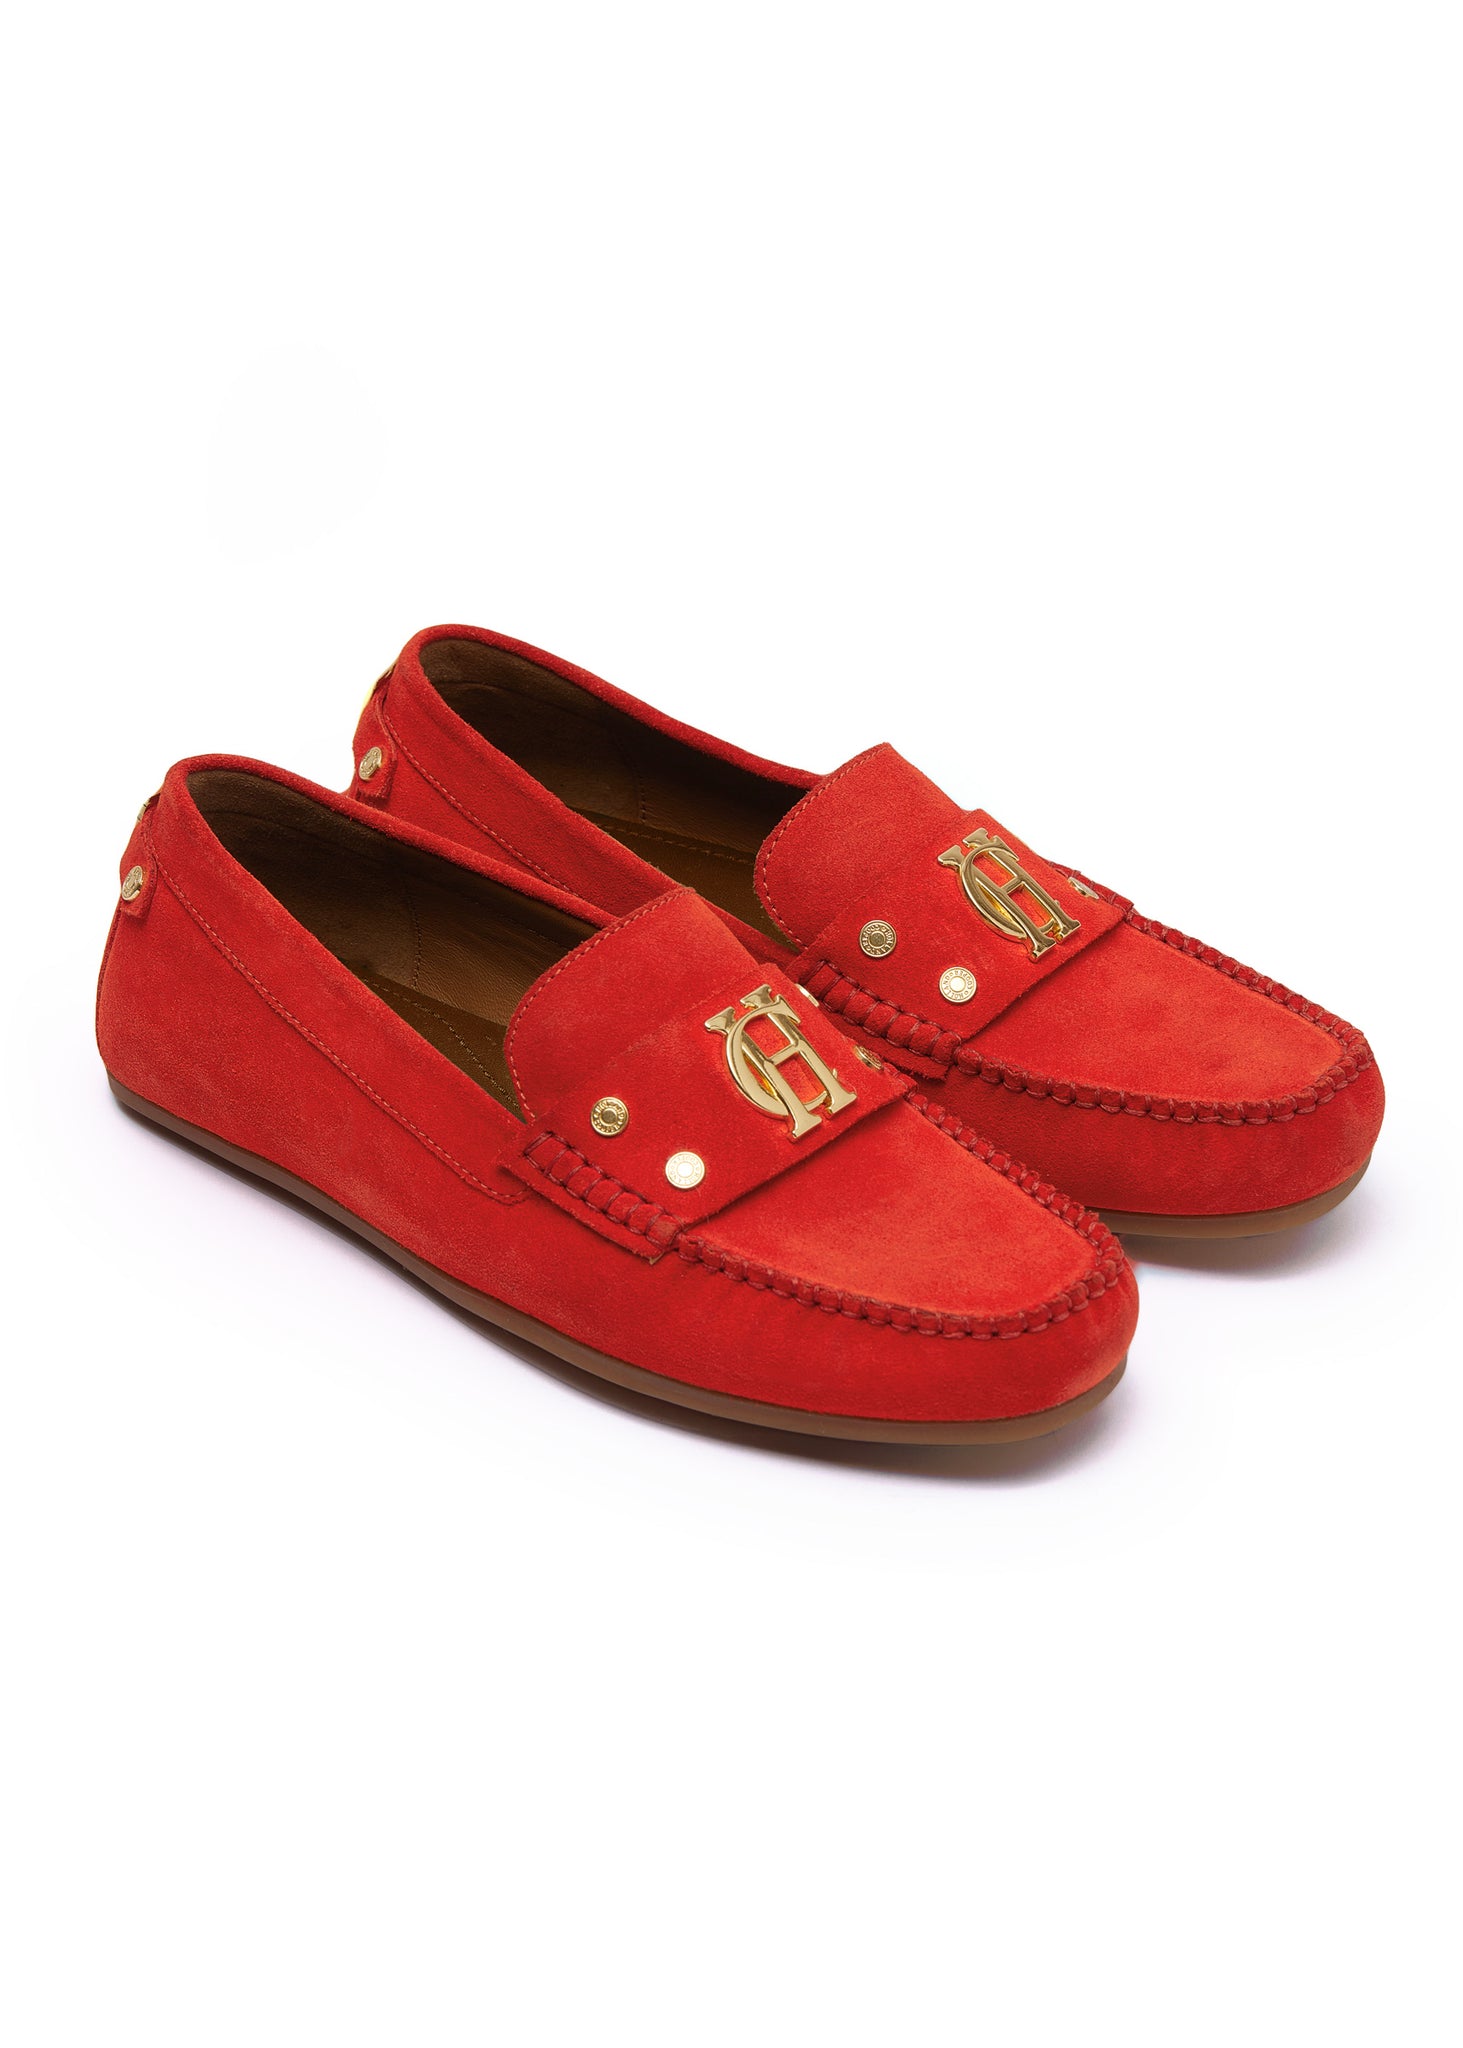 orange suede loafers with a leather sole and top stitching details and gold hardware and tan inner sole